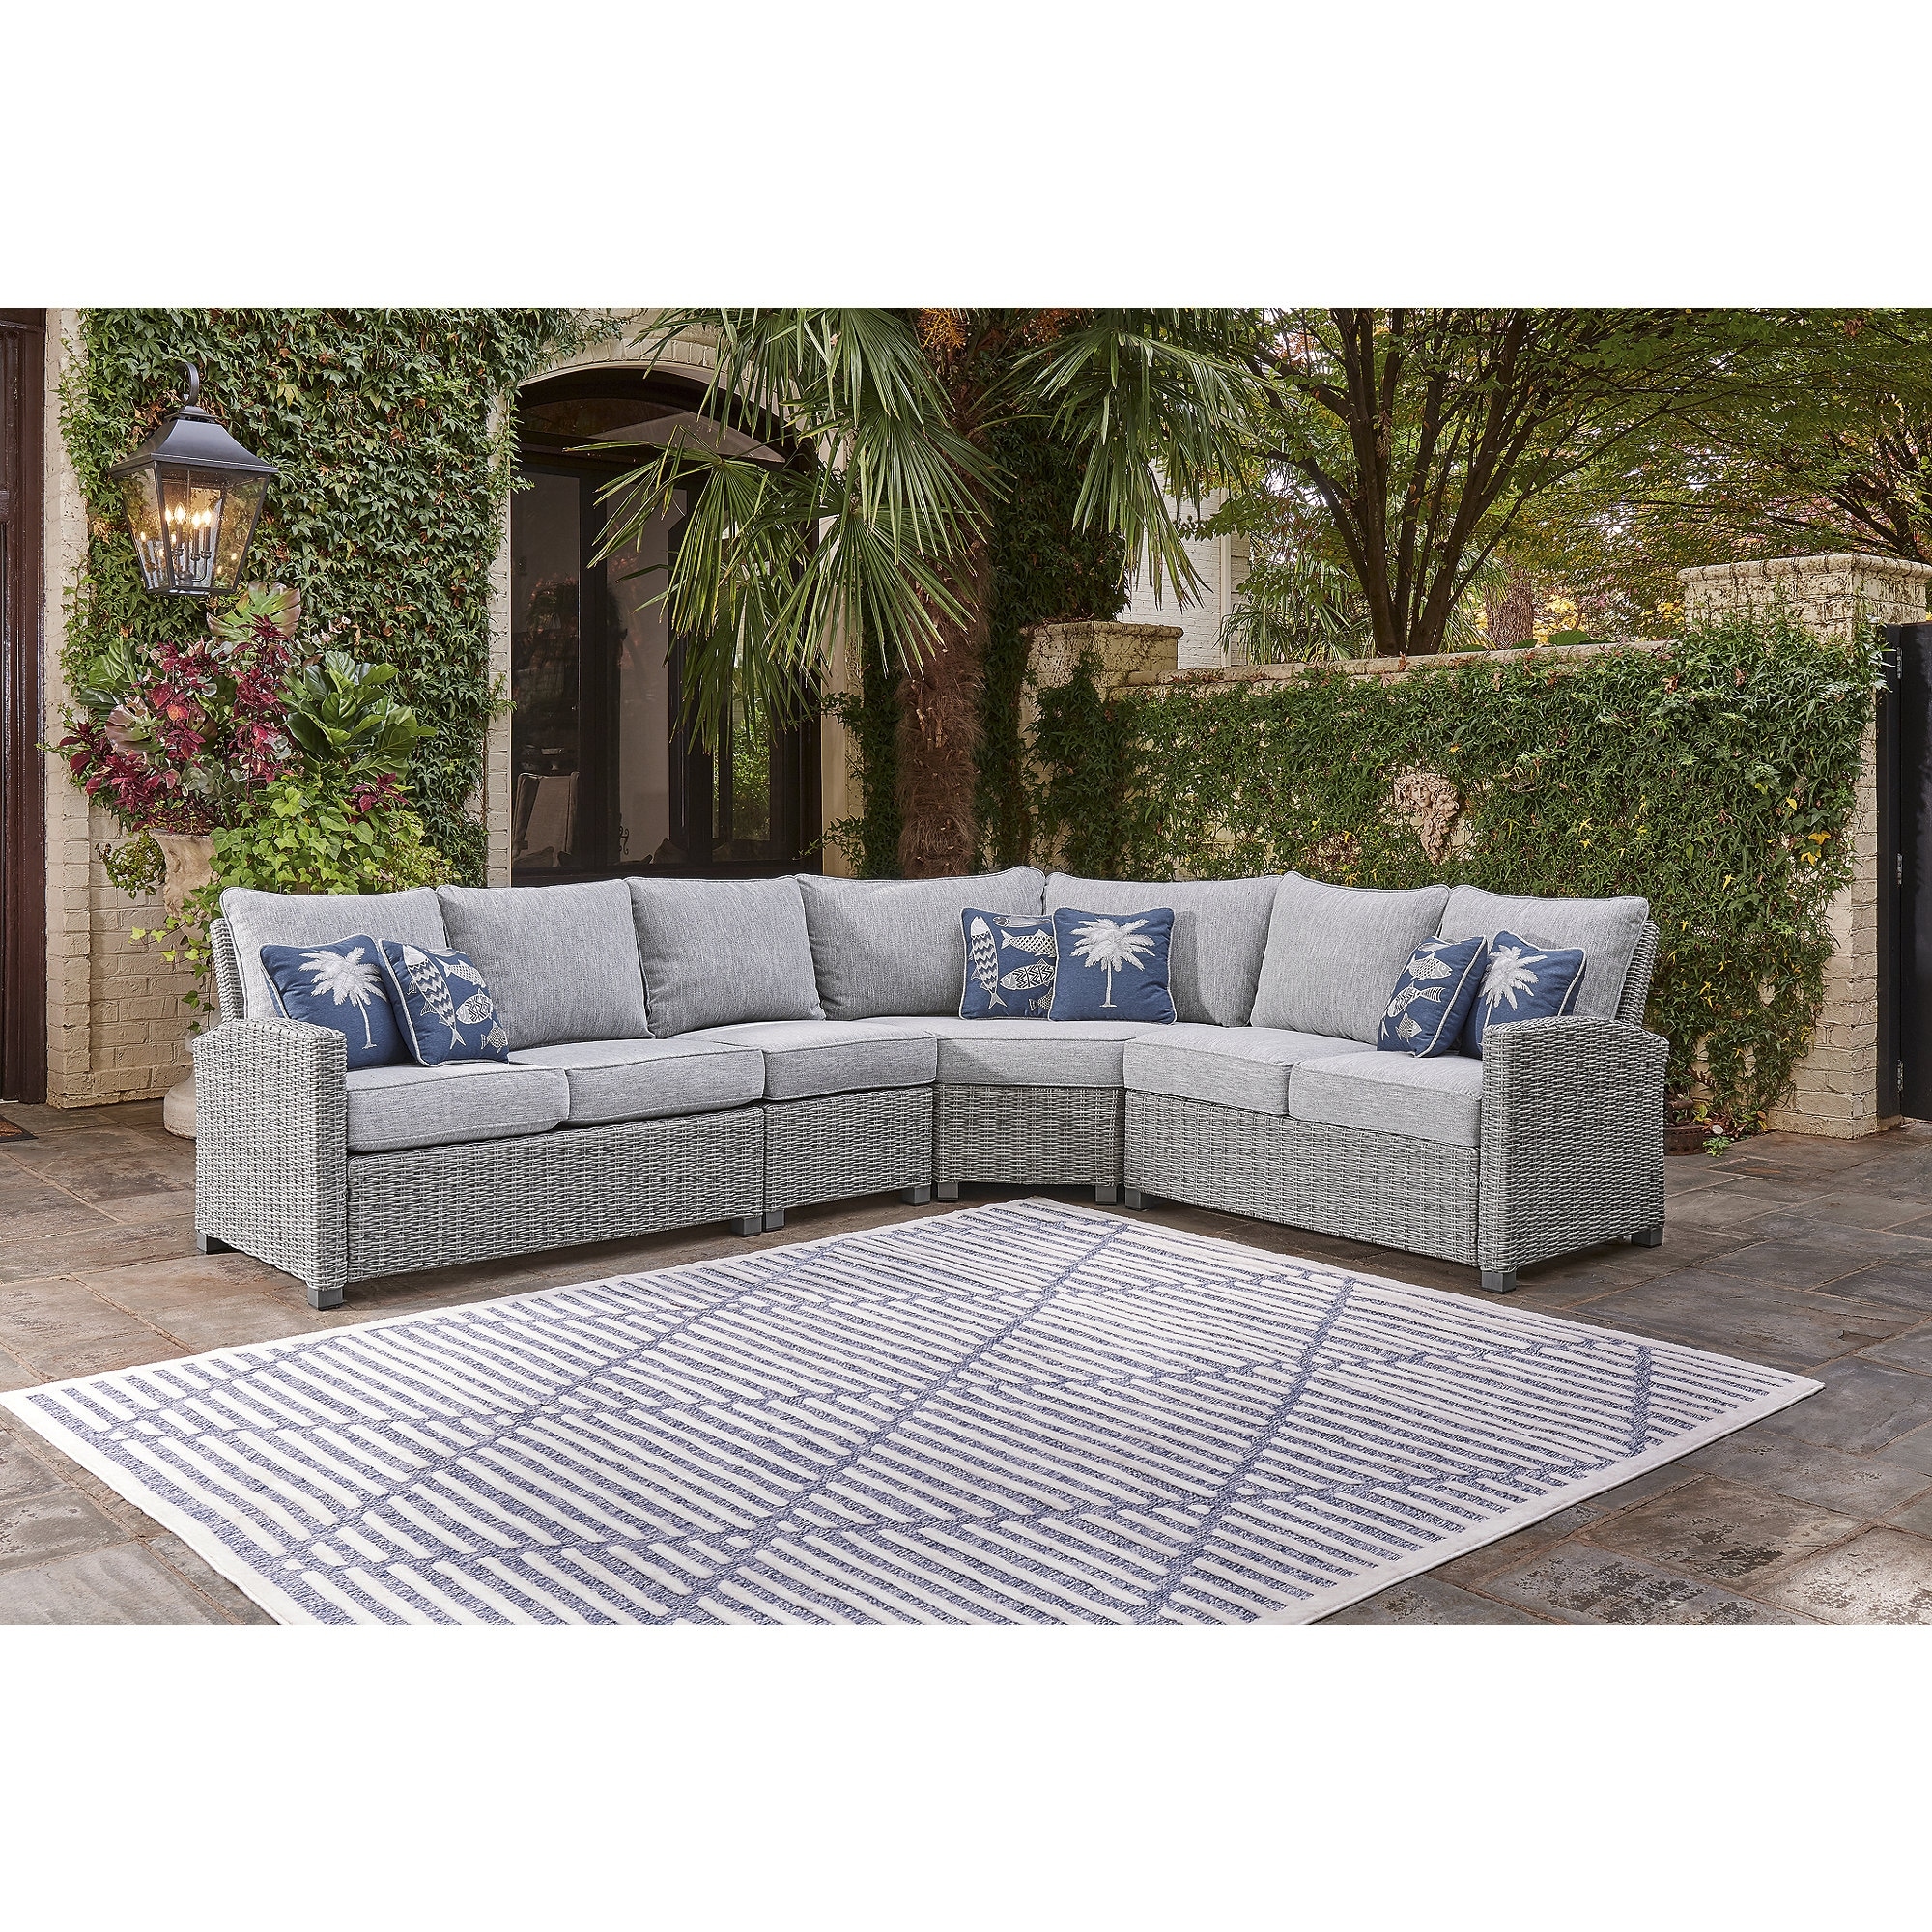 Signature Design By Ashley Naples Beach Light Gray 4-piece Outdoor Sectional - 69w X 39d X 102h